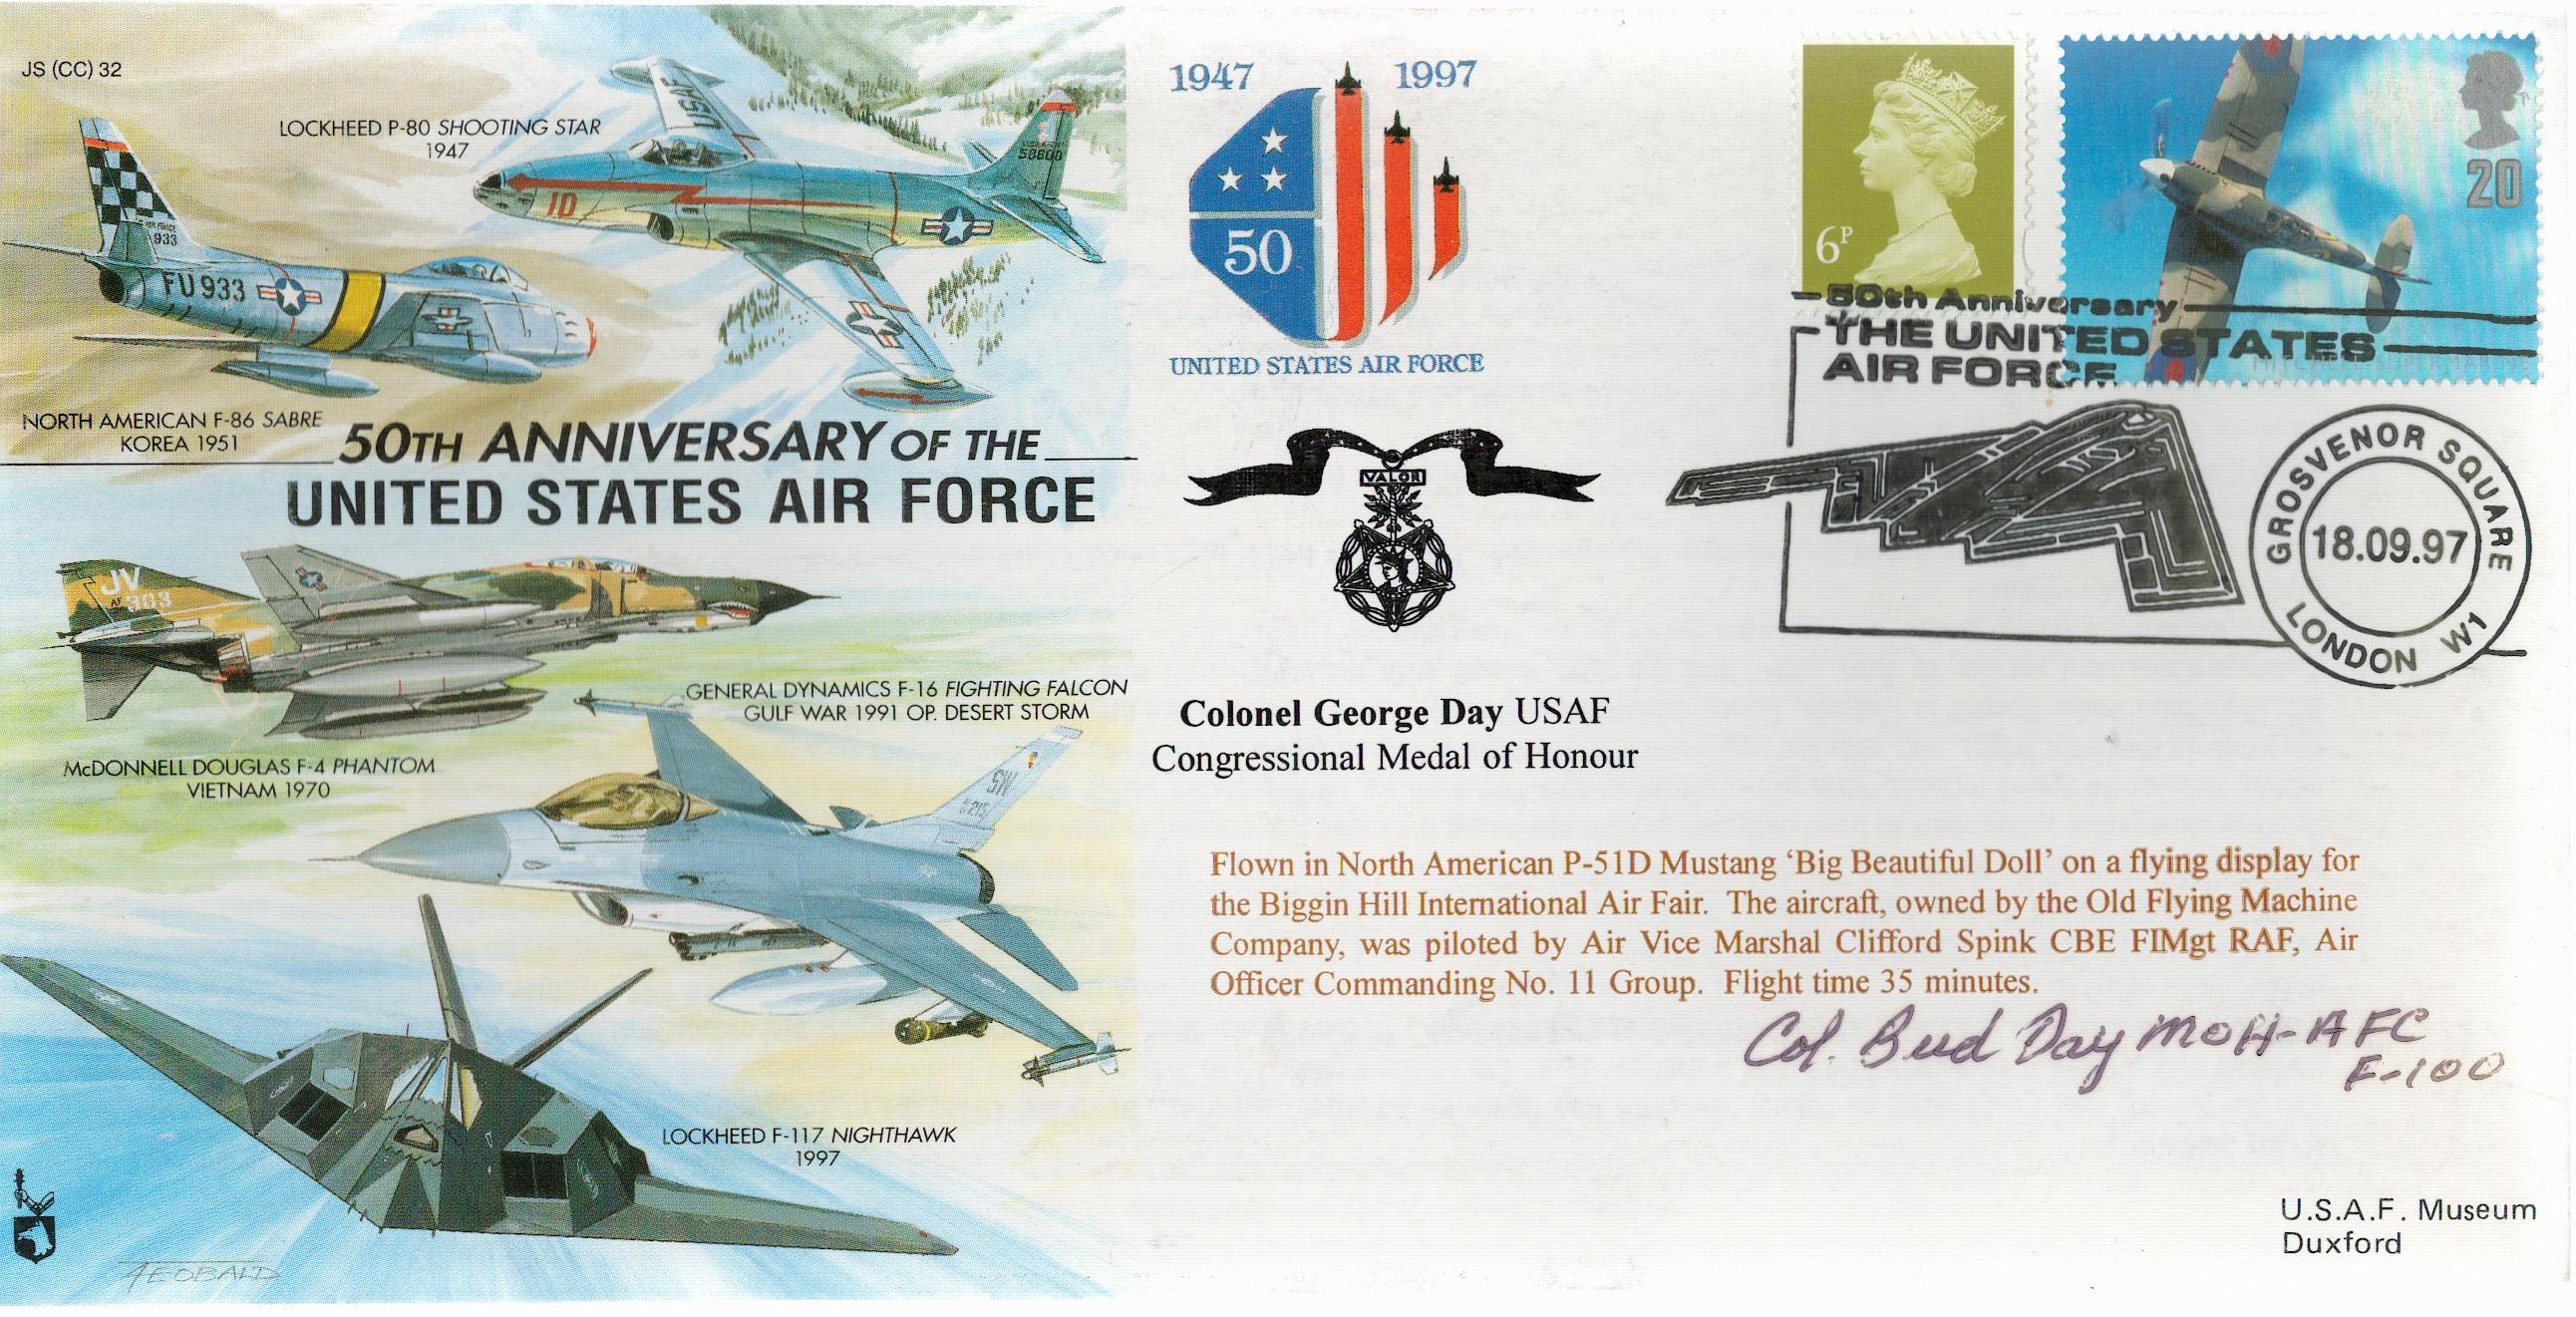 Colonel George Day USAF Signed 50th Anniversary of the USAF FDC. British Stamp with 18.09.97